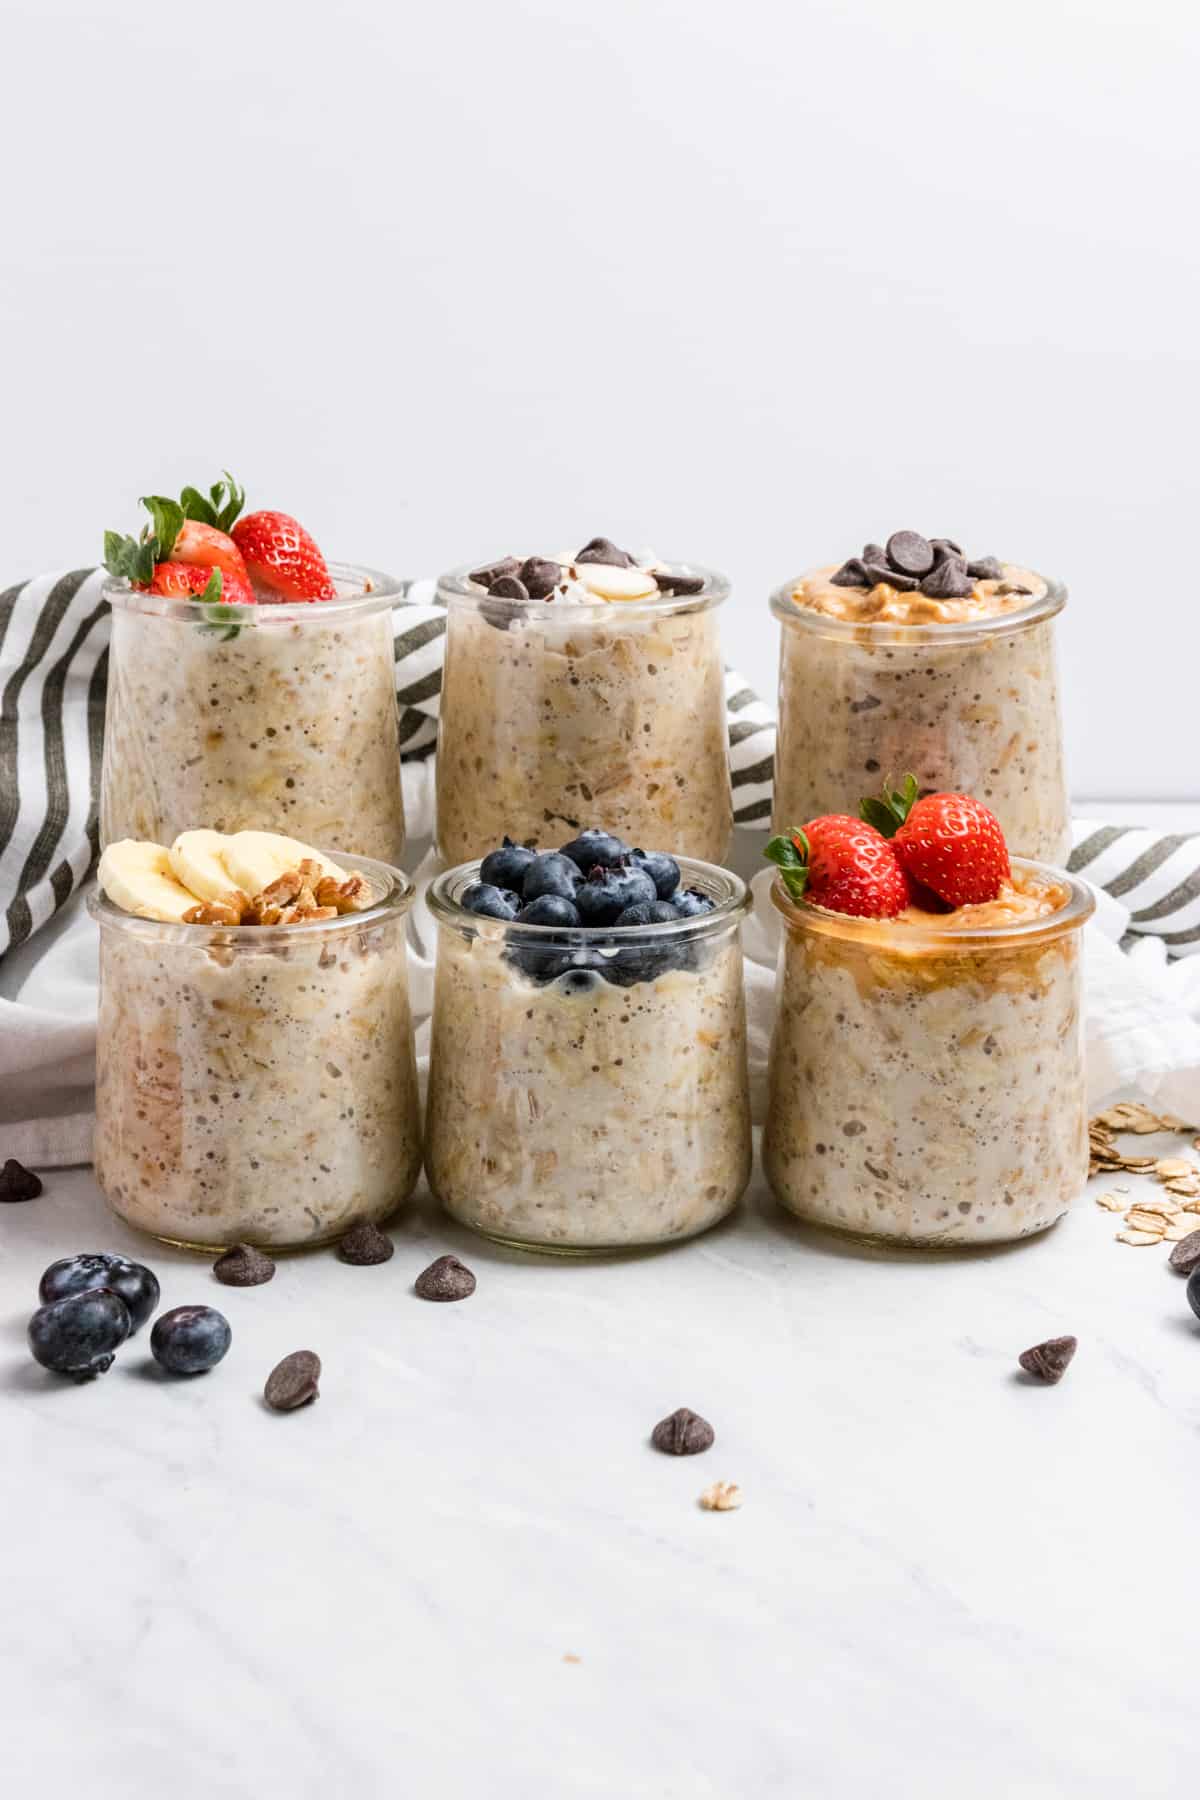 Overnight oats in jars with blueberries, chocolate chips, strawberries, etc.